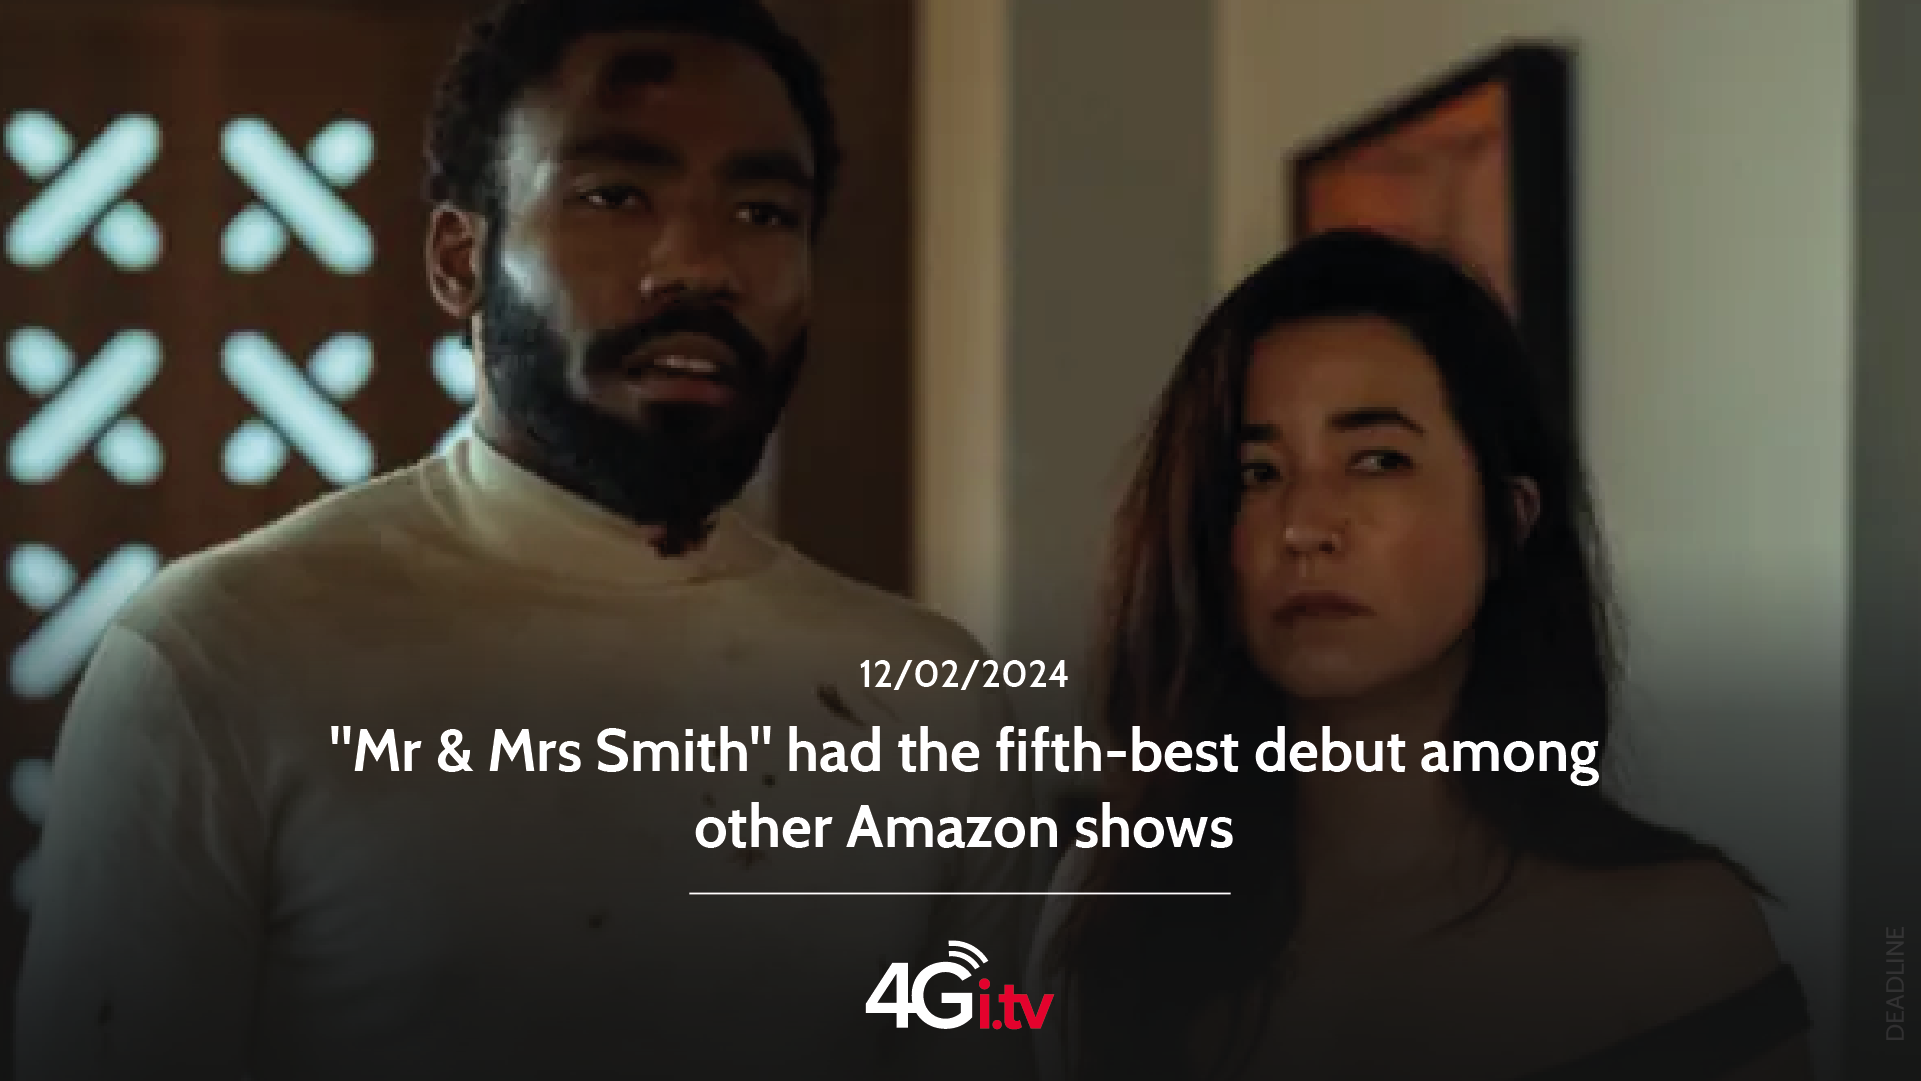 Подробнее о статье “Mr & Mrs Smith” had the fifth-best debut among other Amazon shows